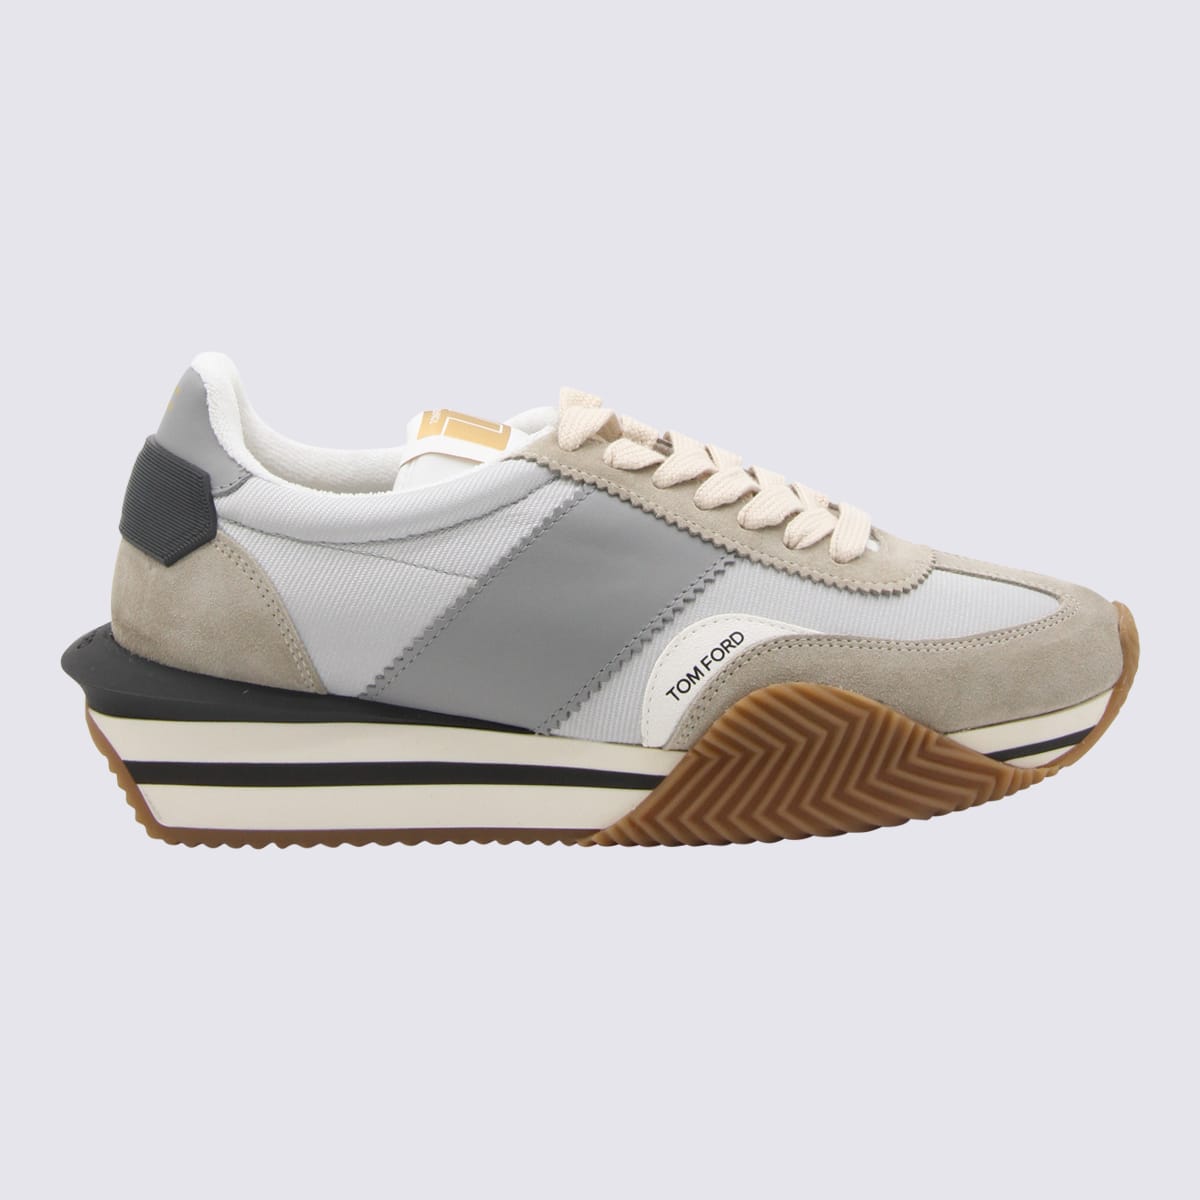 TOM FORD GREY LEATHER JAMES SNEAKERS